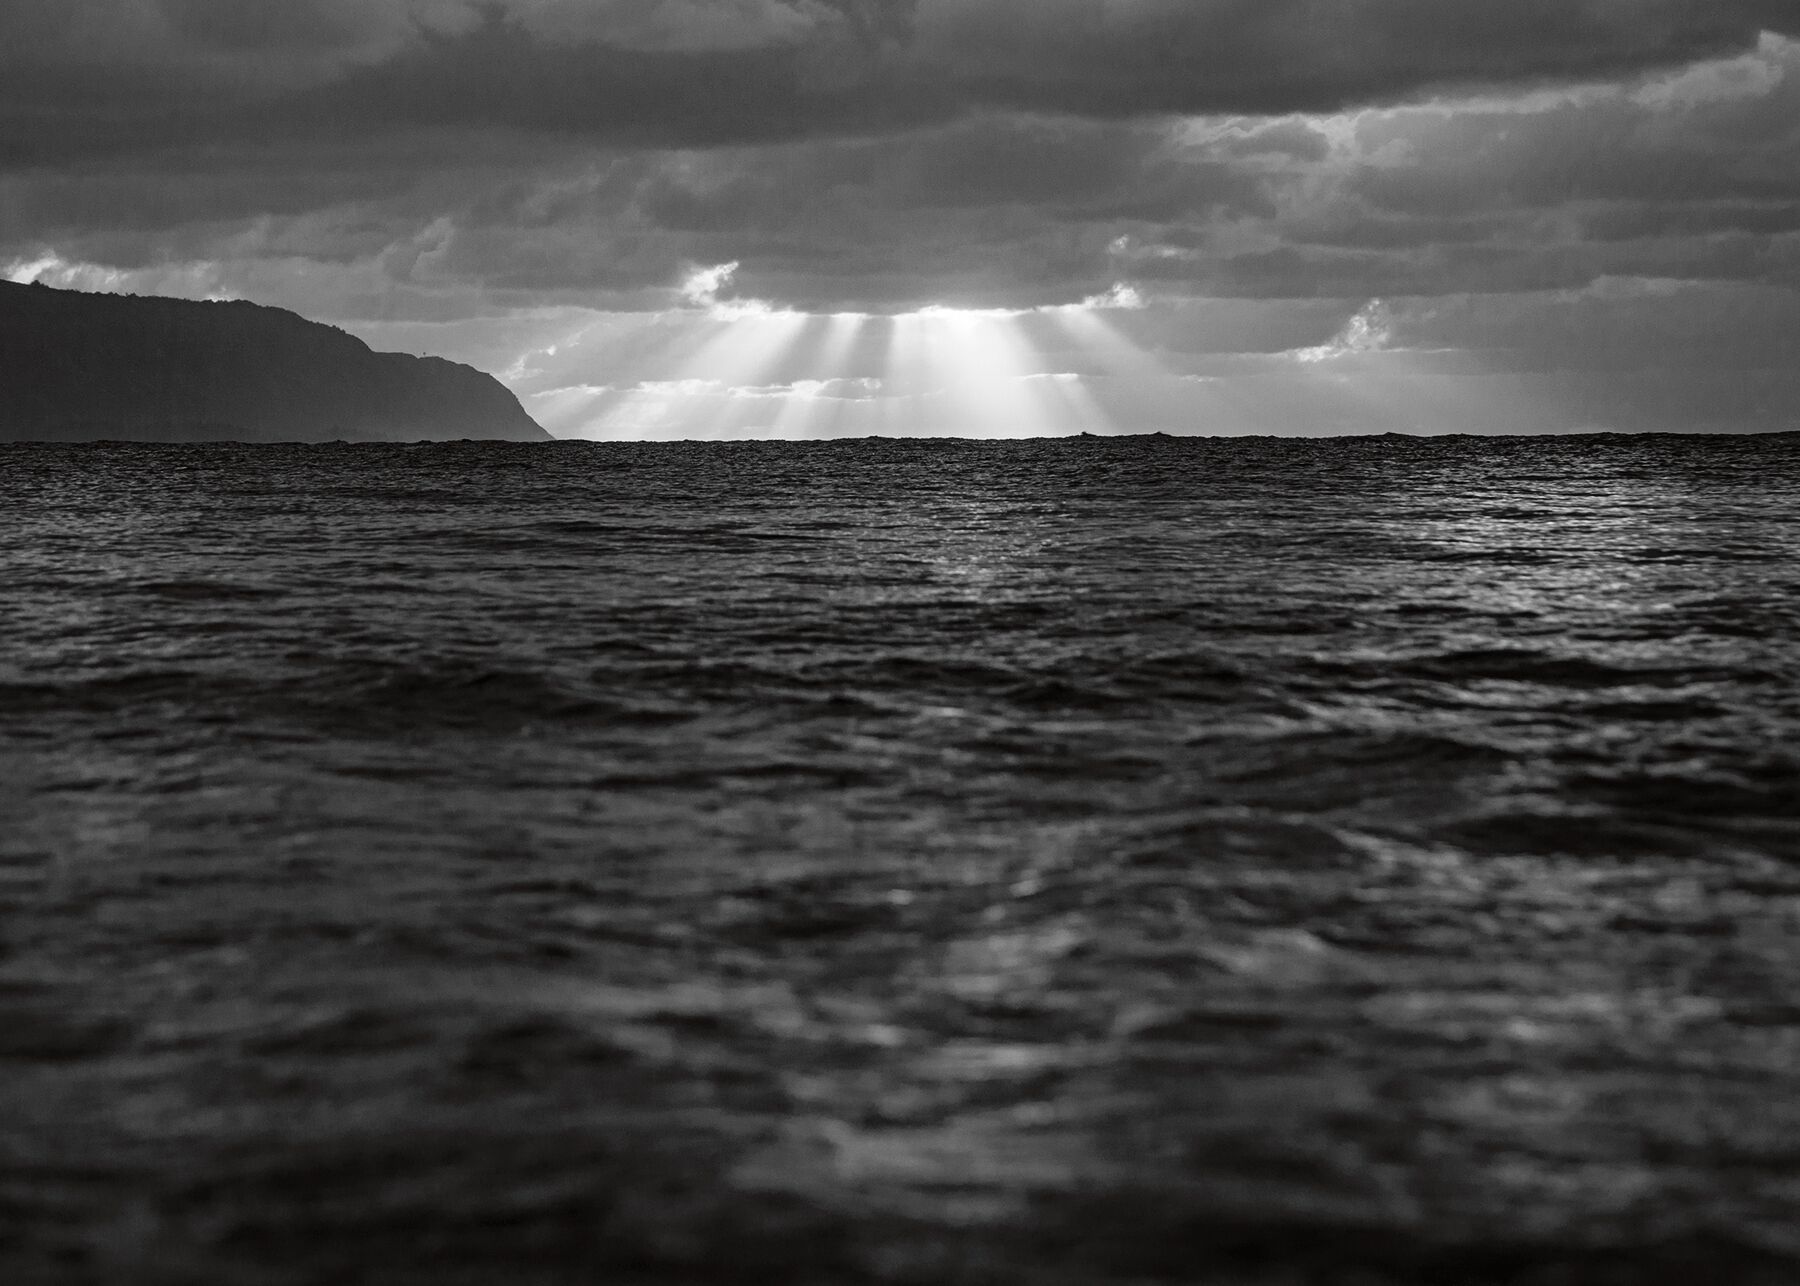 Sun rays break through the clouds over the ocean from the shores of Oahu, Hawaii